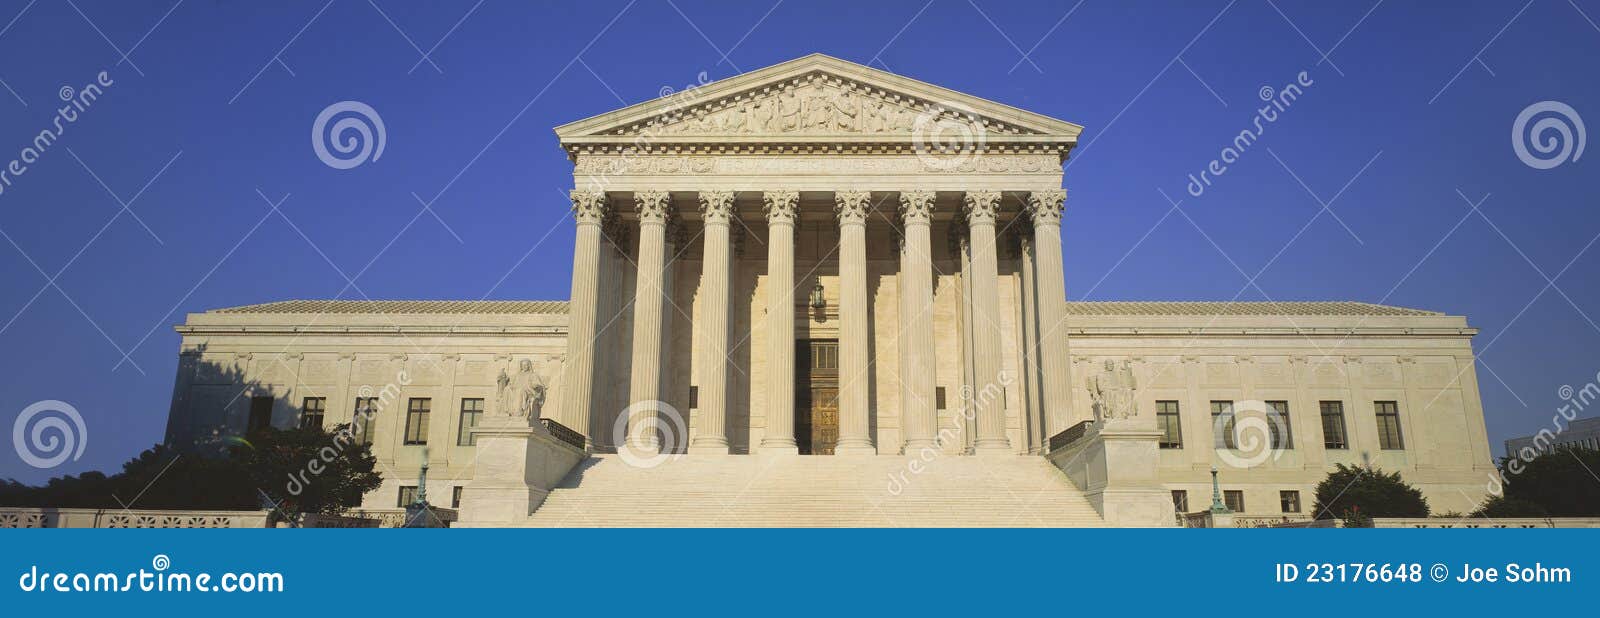 view of entire us supreme court building,